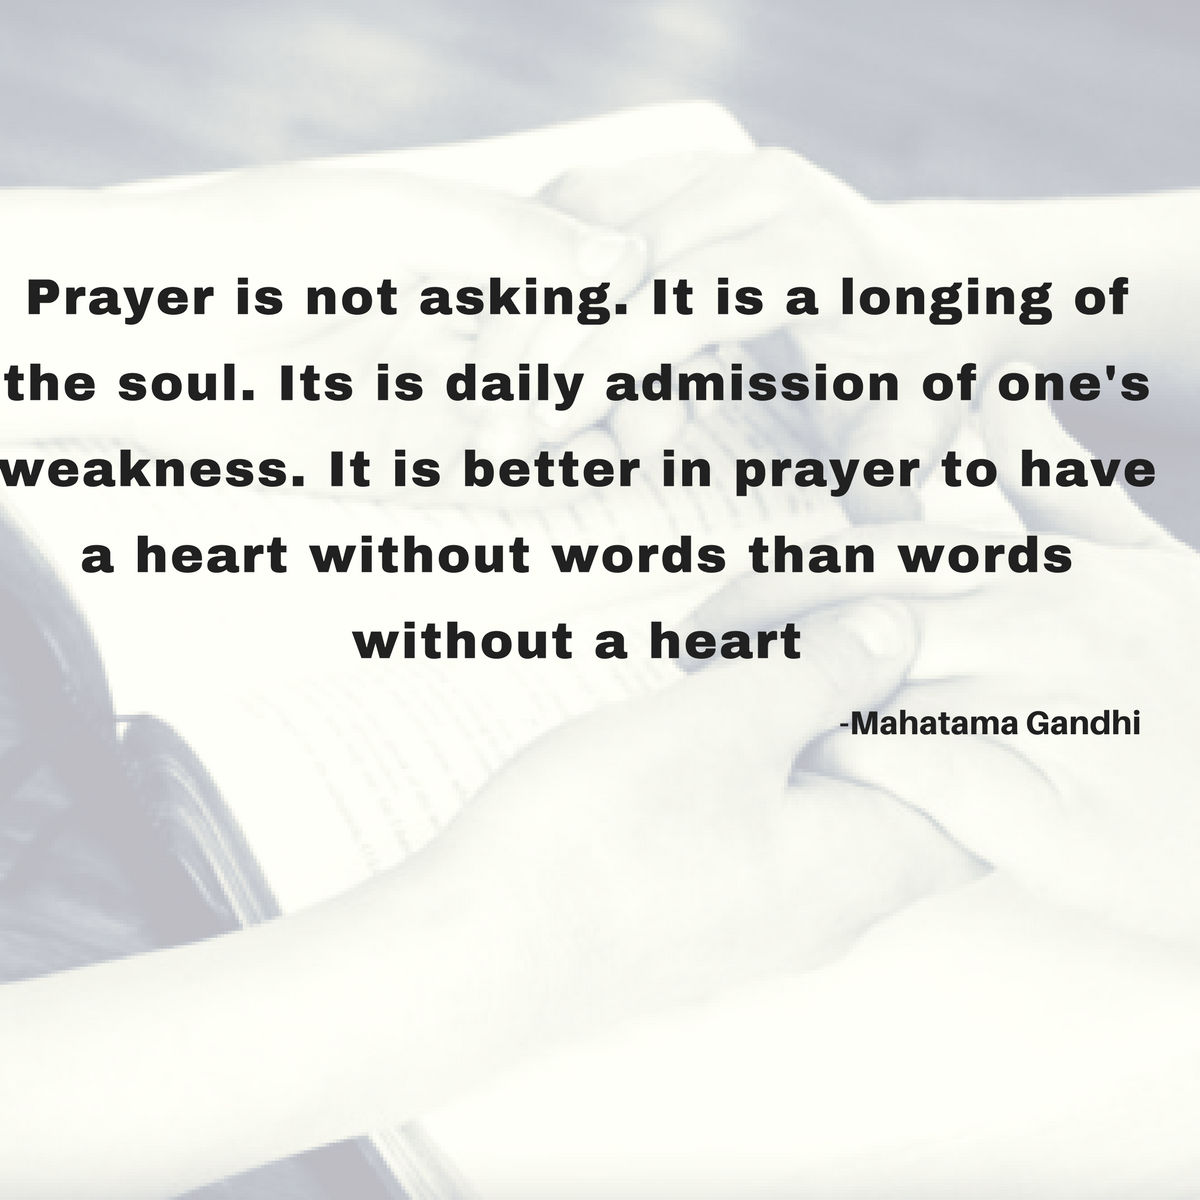 Prayer is not asking. It is a longing of the soul. Its is daily admission of one's weakness. It is better in prayer to have a heart without words than words without a heart.png